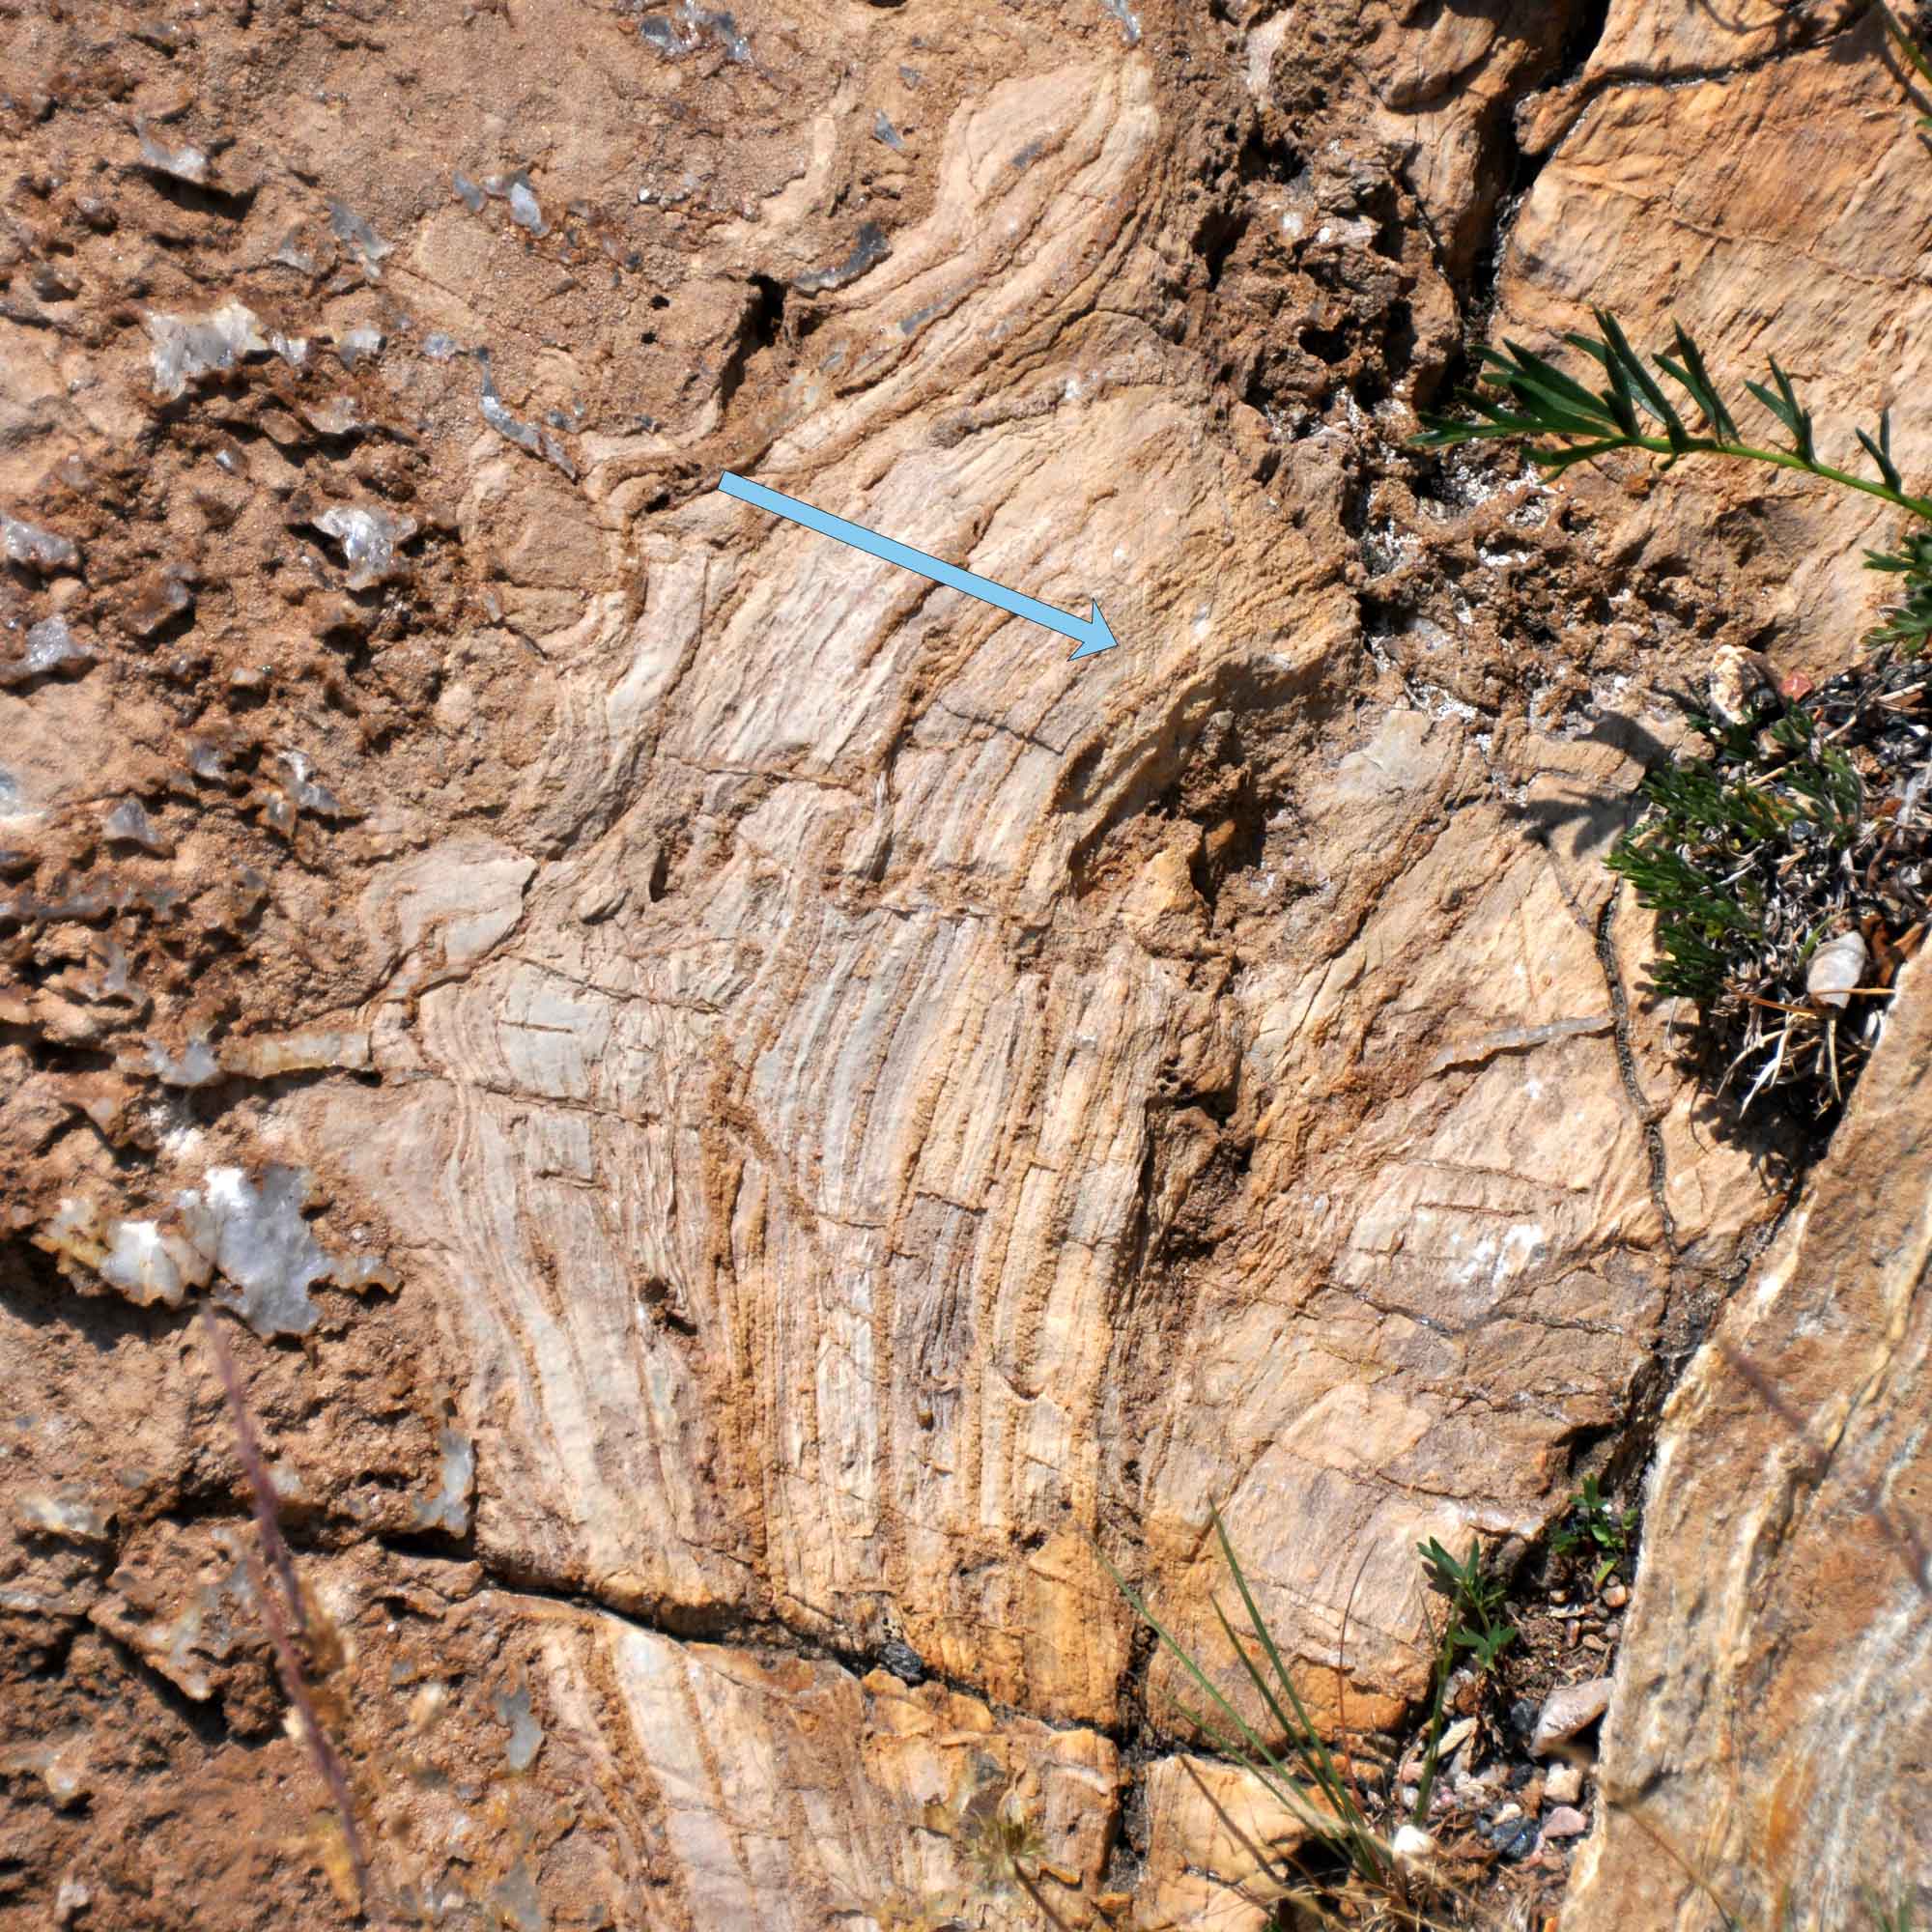 Photograph of a stromatolite fossil in the Nash Formation of Wyoming. An arrow indicates the direction of growth.